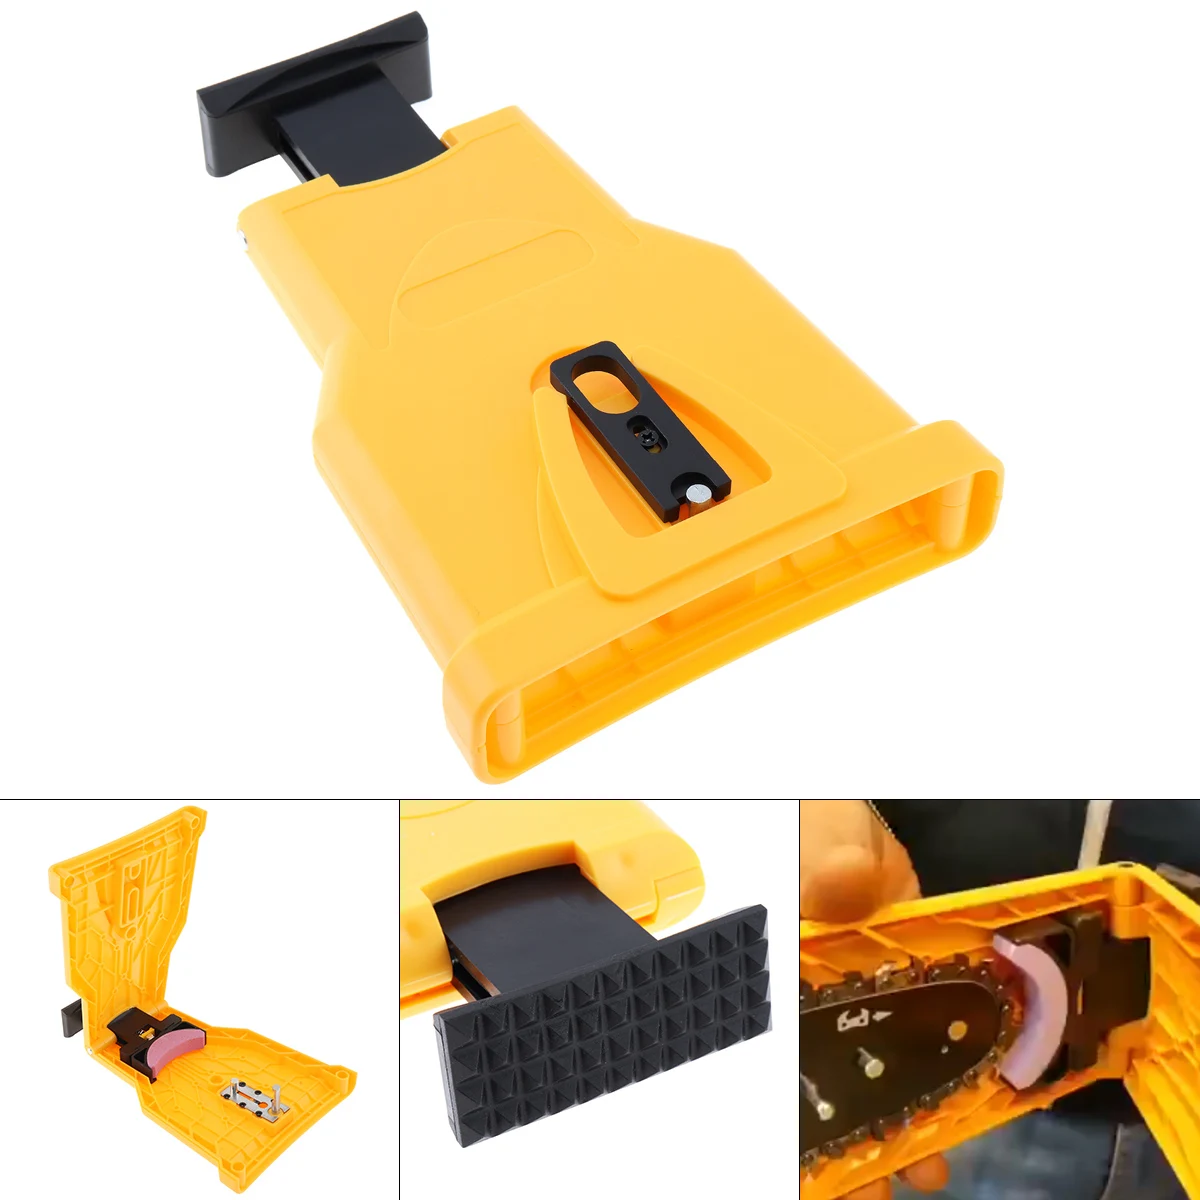 Portable Chainsaw Teeth Sharpener Chainsaw Easy Power Sharp Stone Grinder Fast Grinding Chainsaw Chain Sharpener Tools electric hand drill drill grinder portable grinder drill grinder high precision manual tool drill bit grinding stone tool set